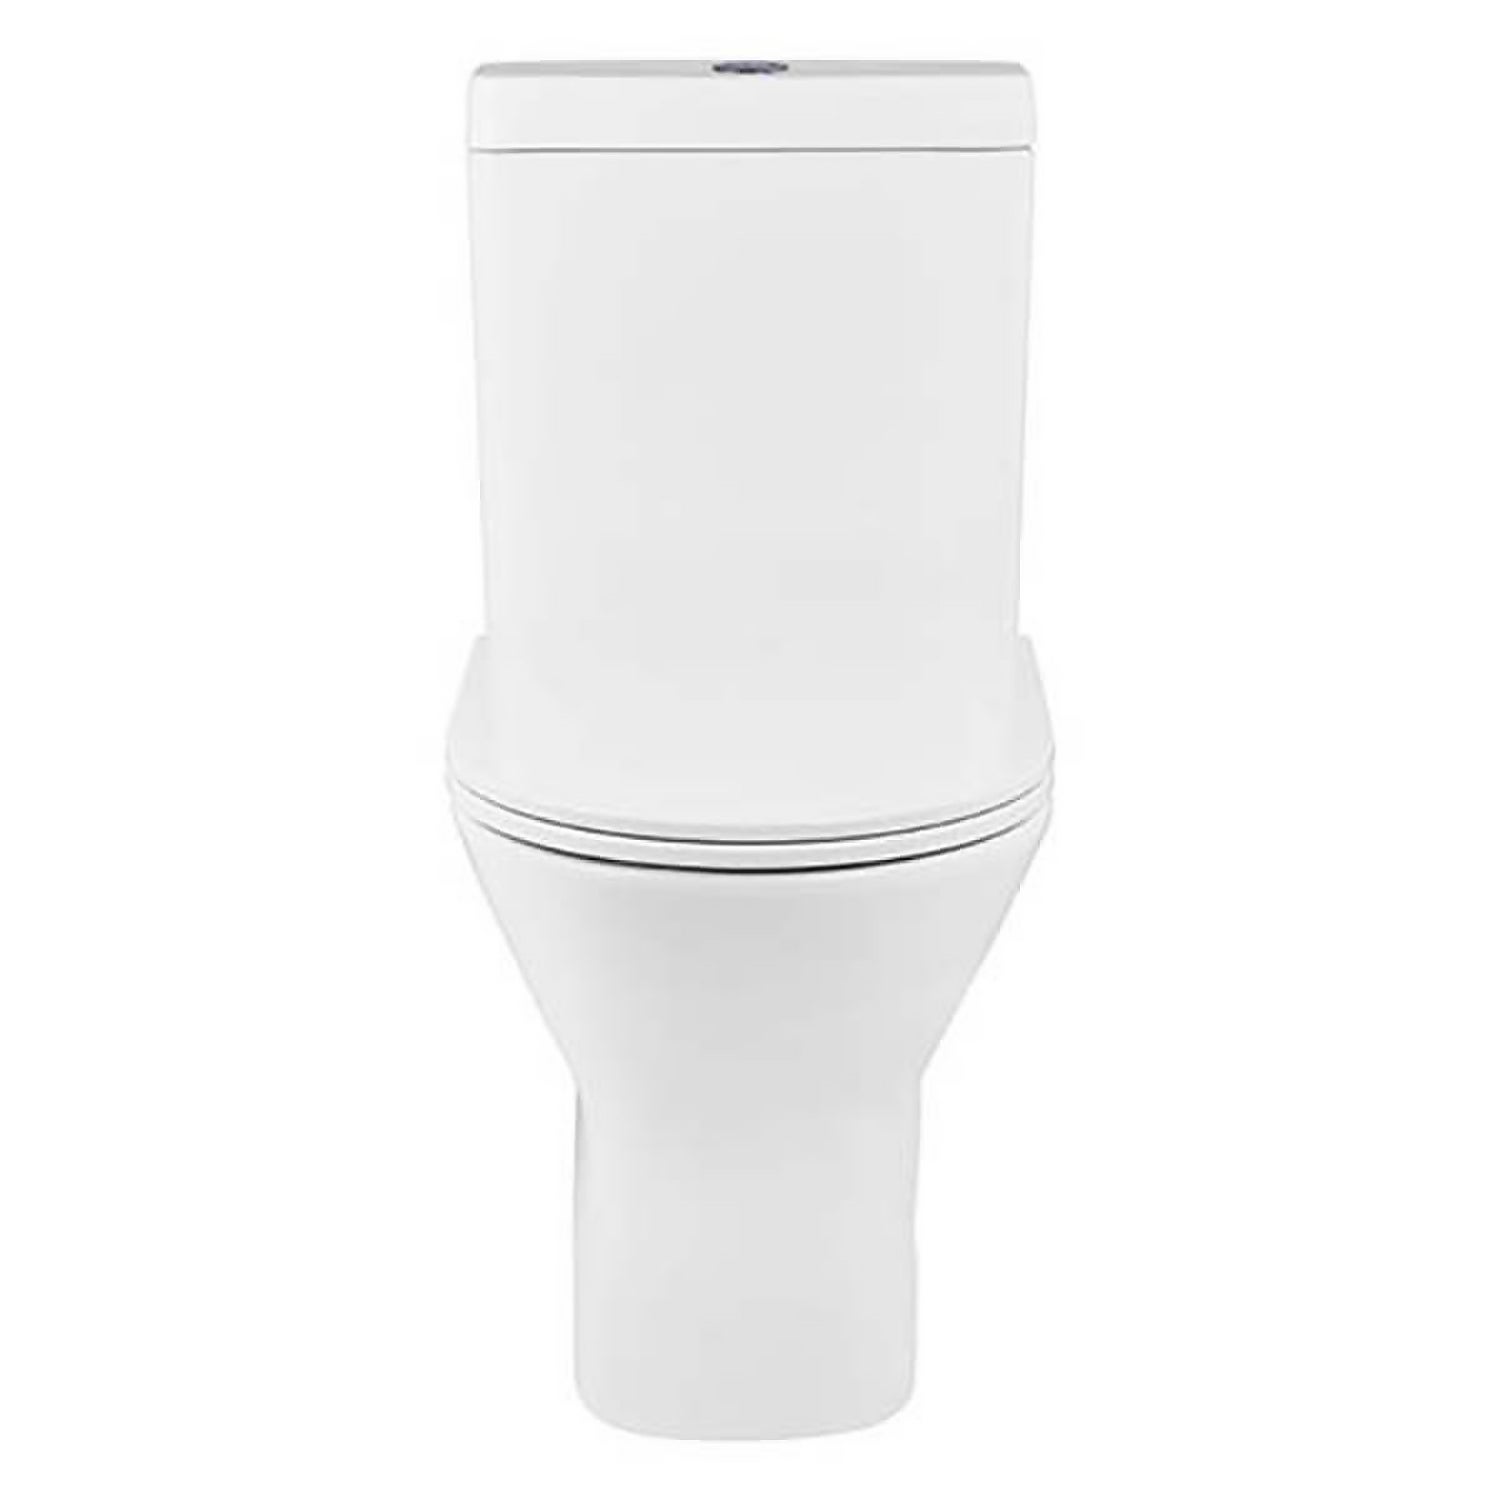 Falcon Rimless Back To Wall Close Coupled Toilet with Soft Close Toilet Seat